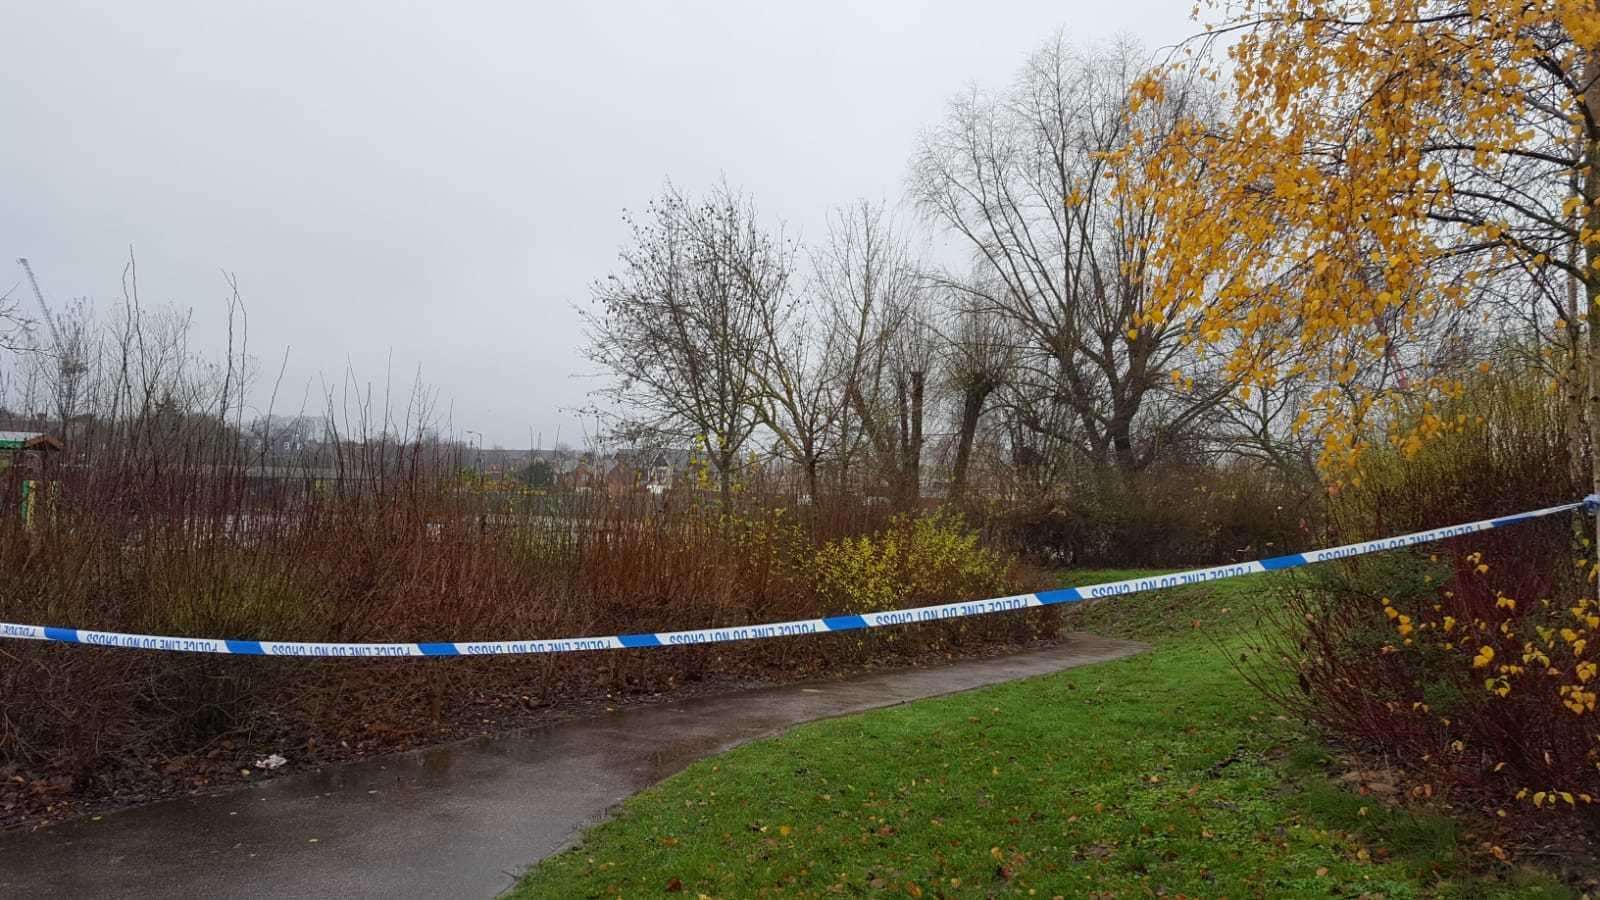 Police have taped off a section off path along the River Stour in Canterbury